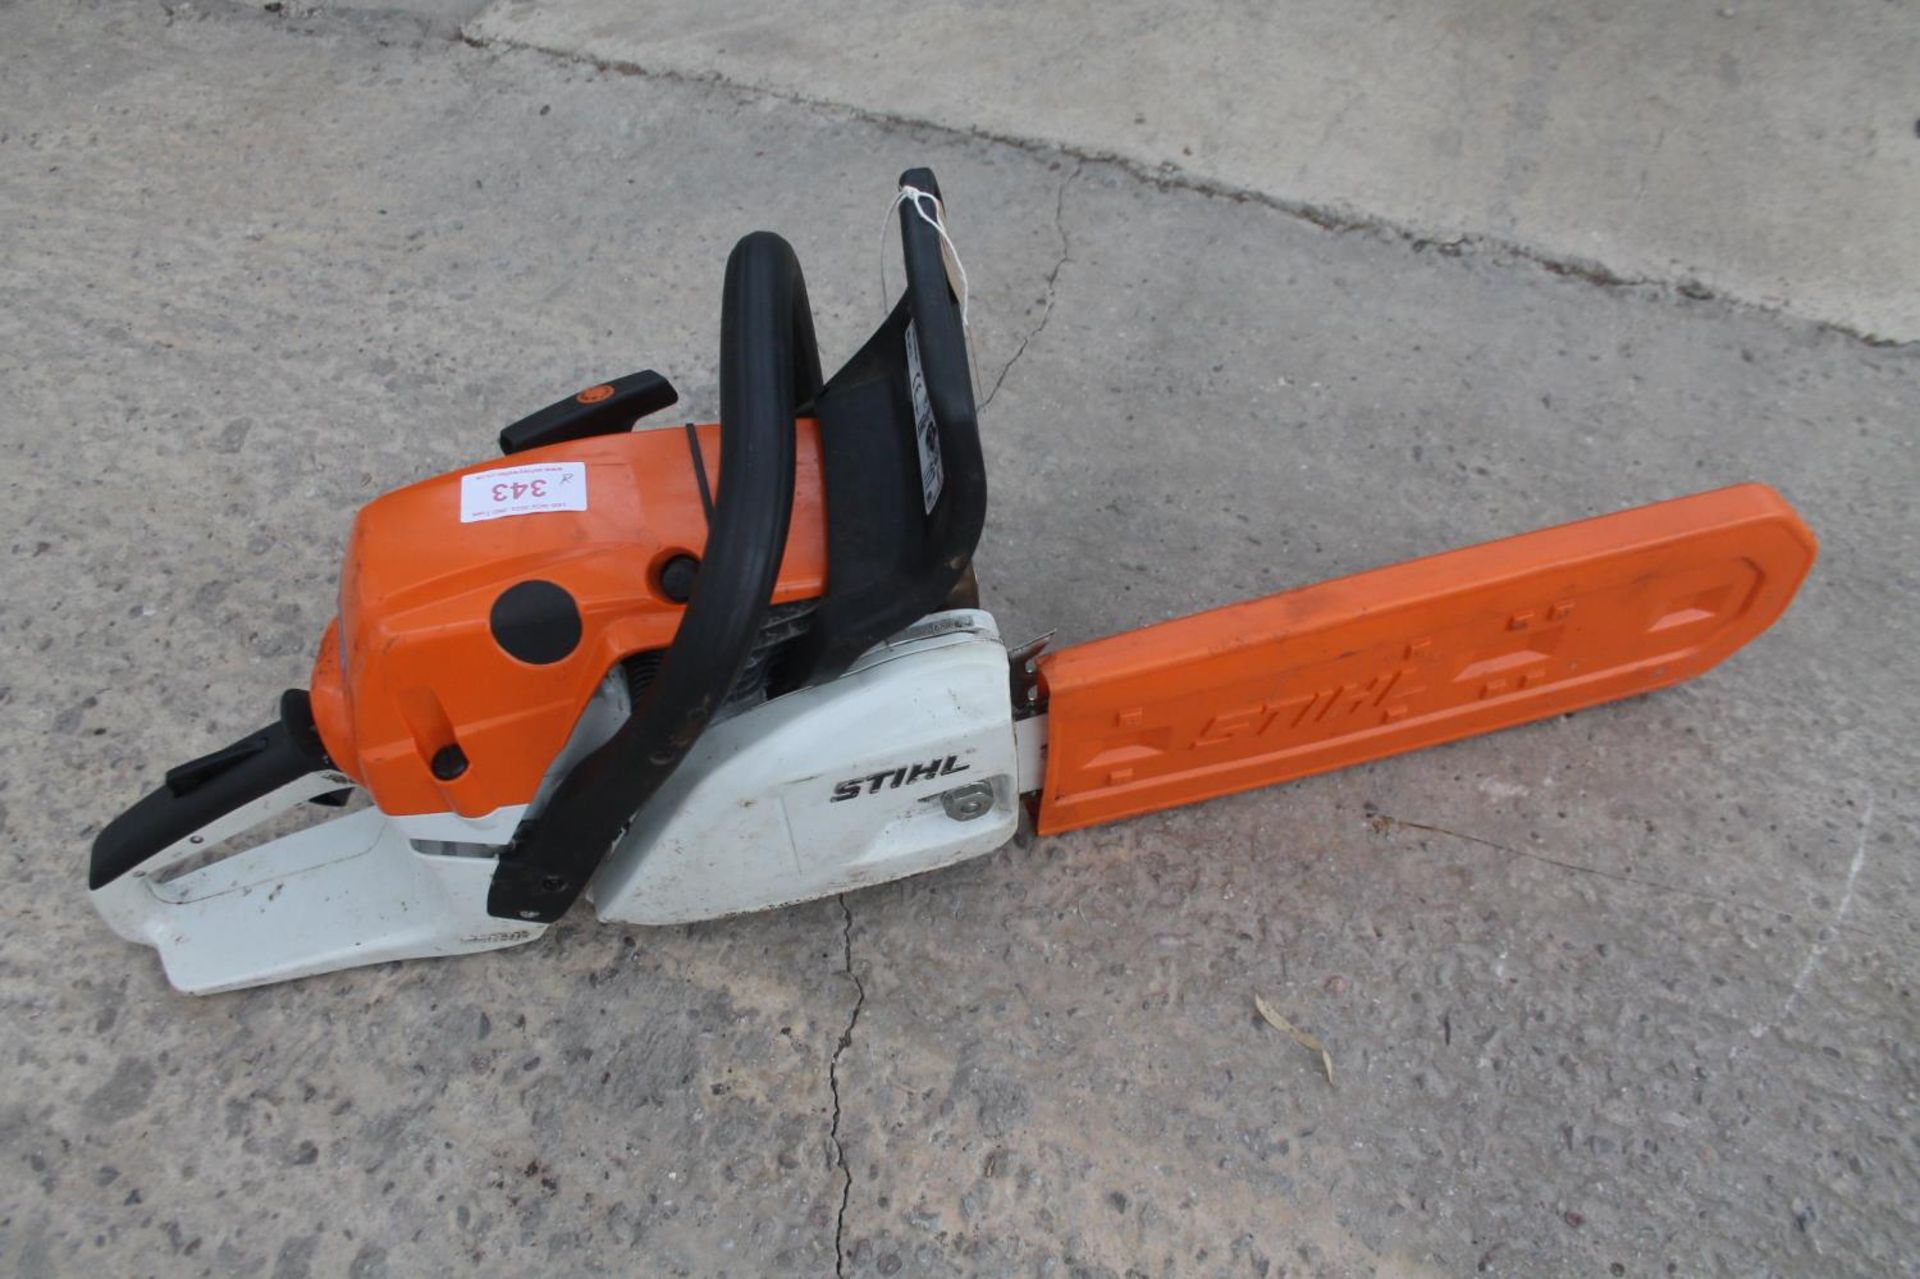 STHIL MS241C CHAINSAW NO VAT LOTS 343-350 ARE FROM A RETIREMENT DISPERSAL THE OTHER EQUIPMENT HAS - Image 2 of 2